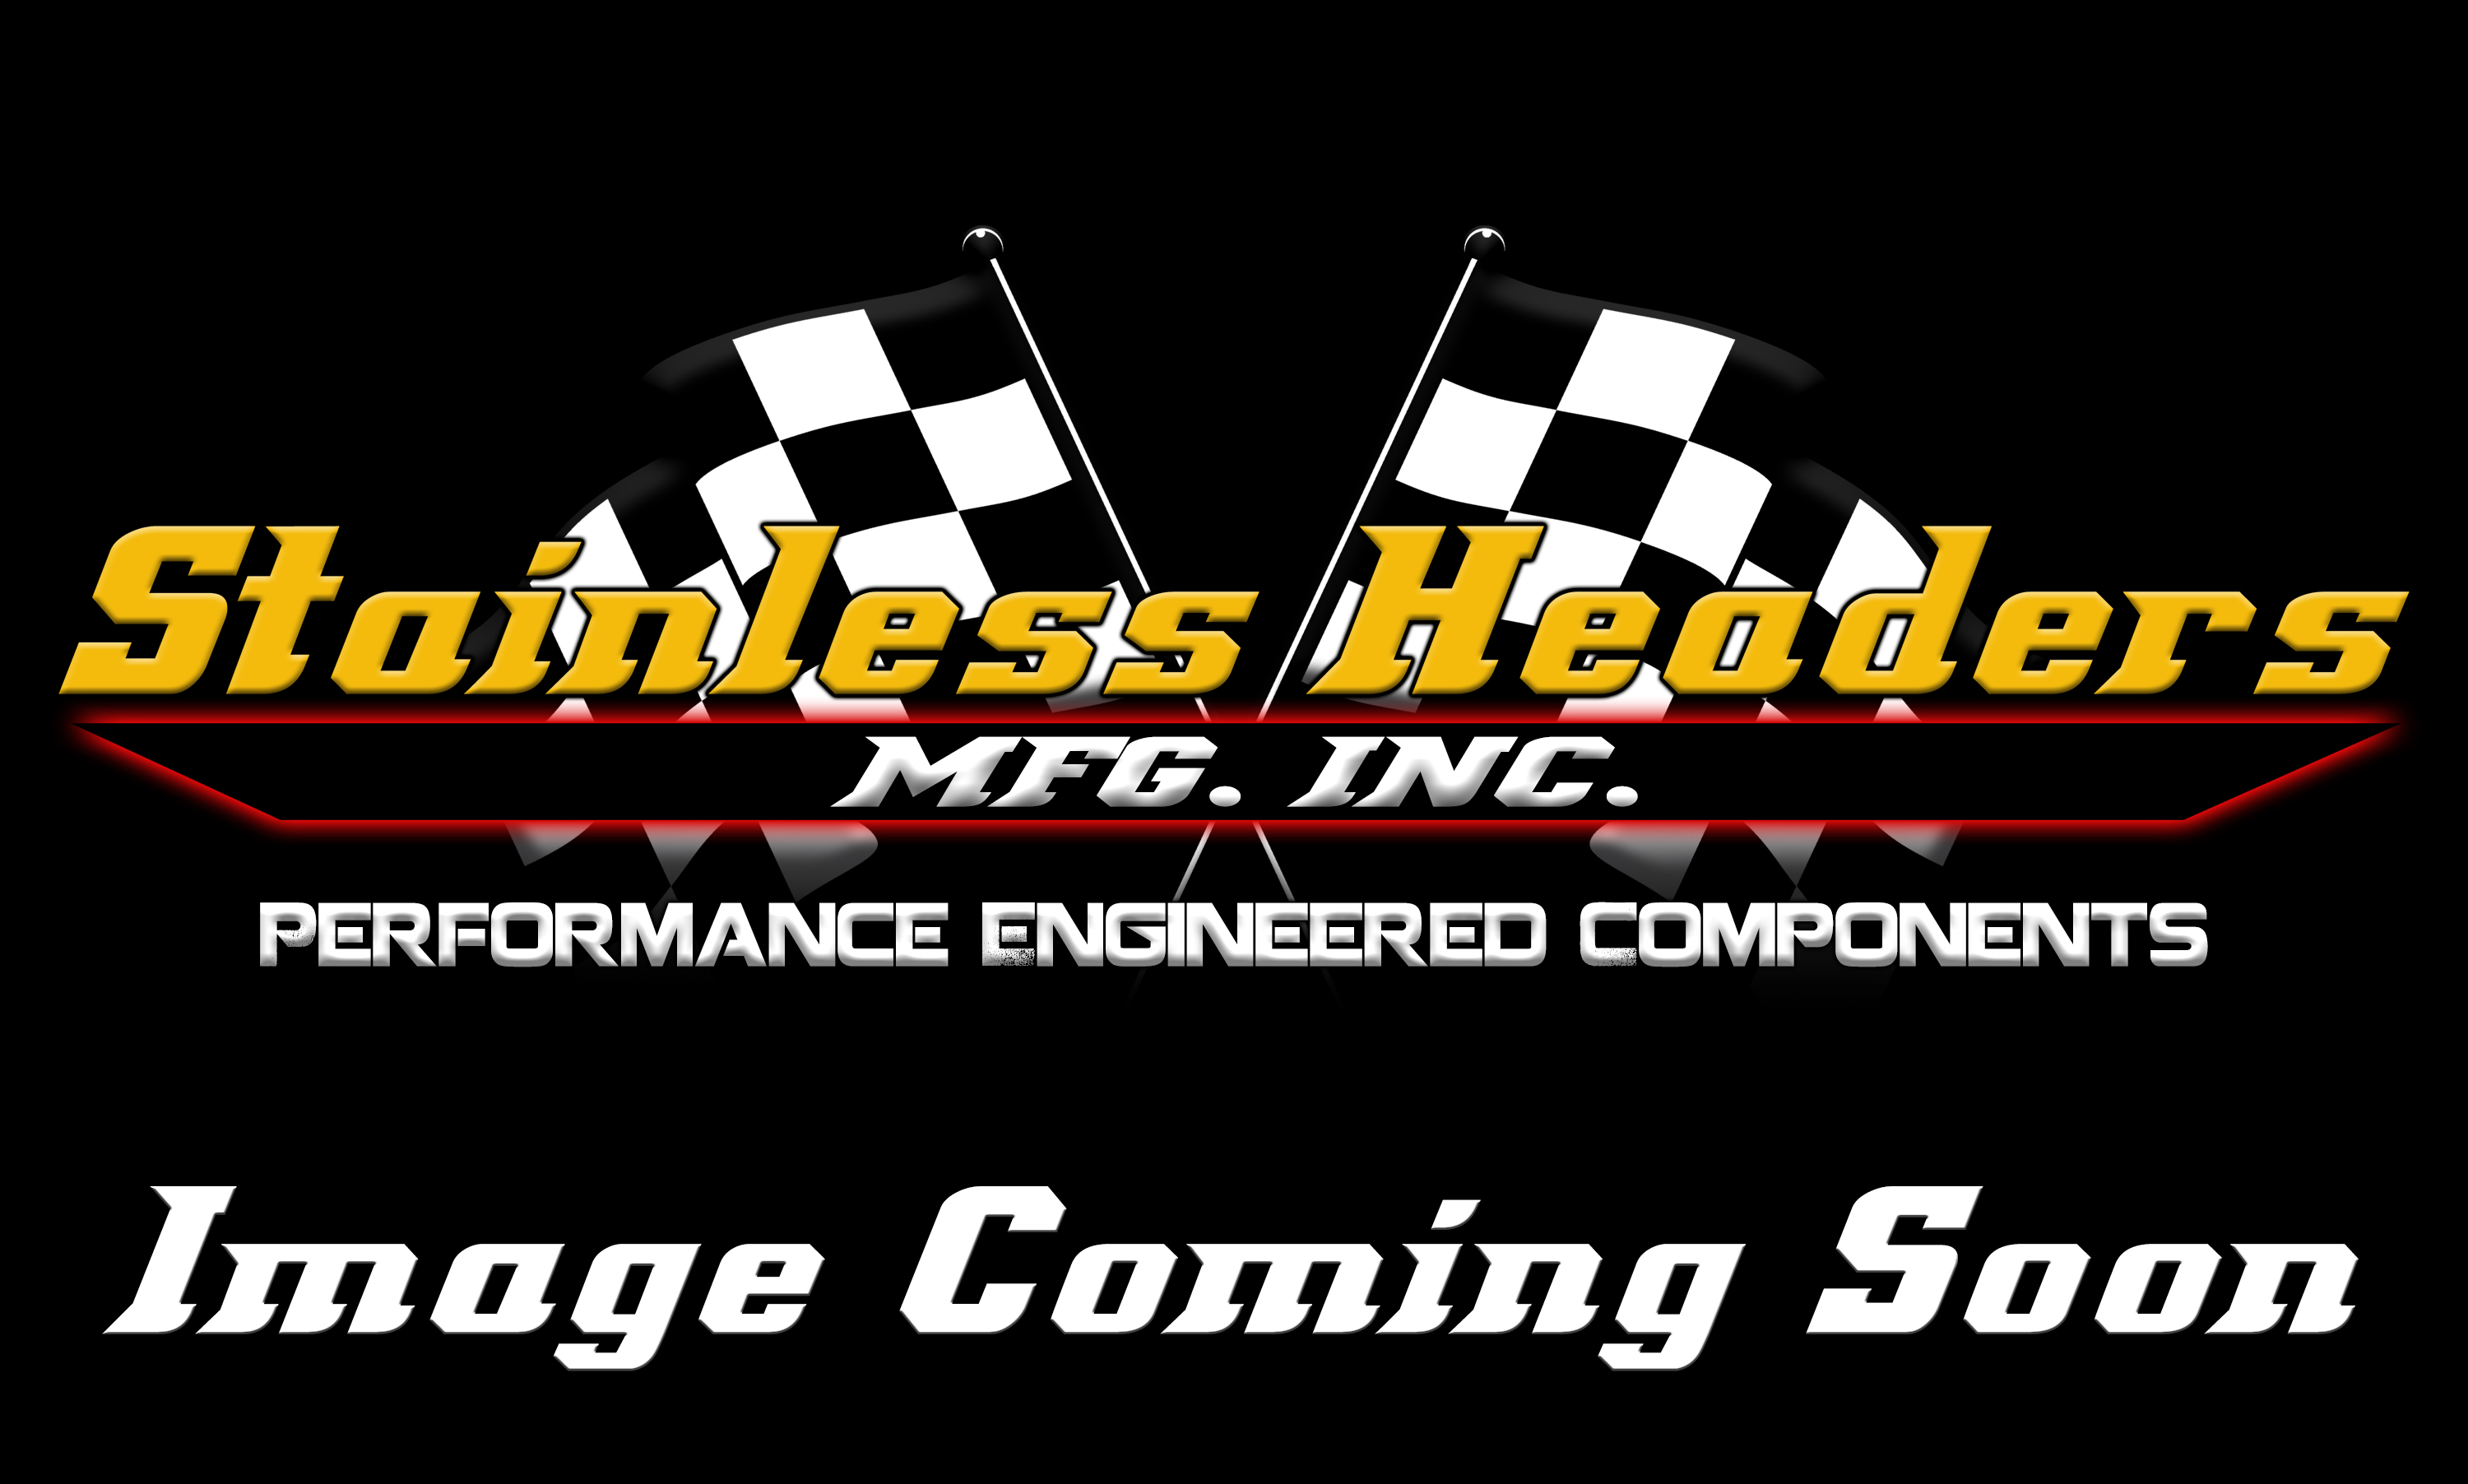 CompTurbo Technologies - CTR3693S-6265 360 Journal Bearing Turbocharger (825 HP)